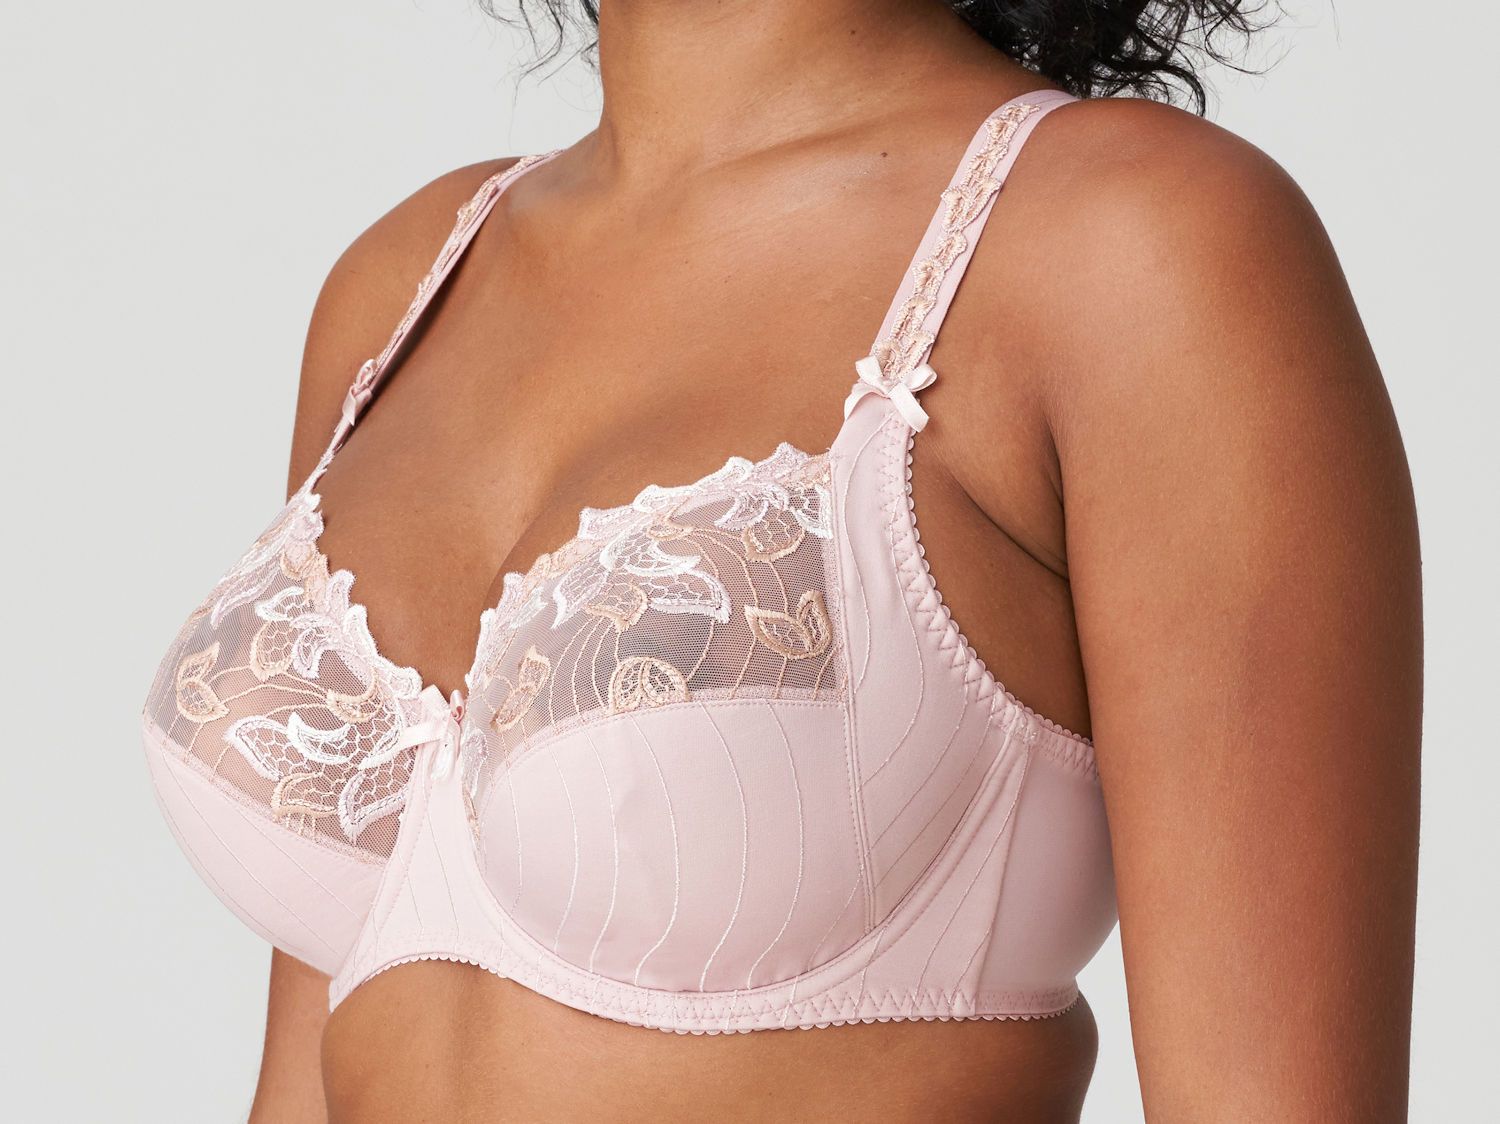 Vintage Lace Padded Wired Strapless Bra - Pink